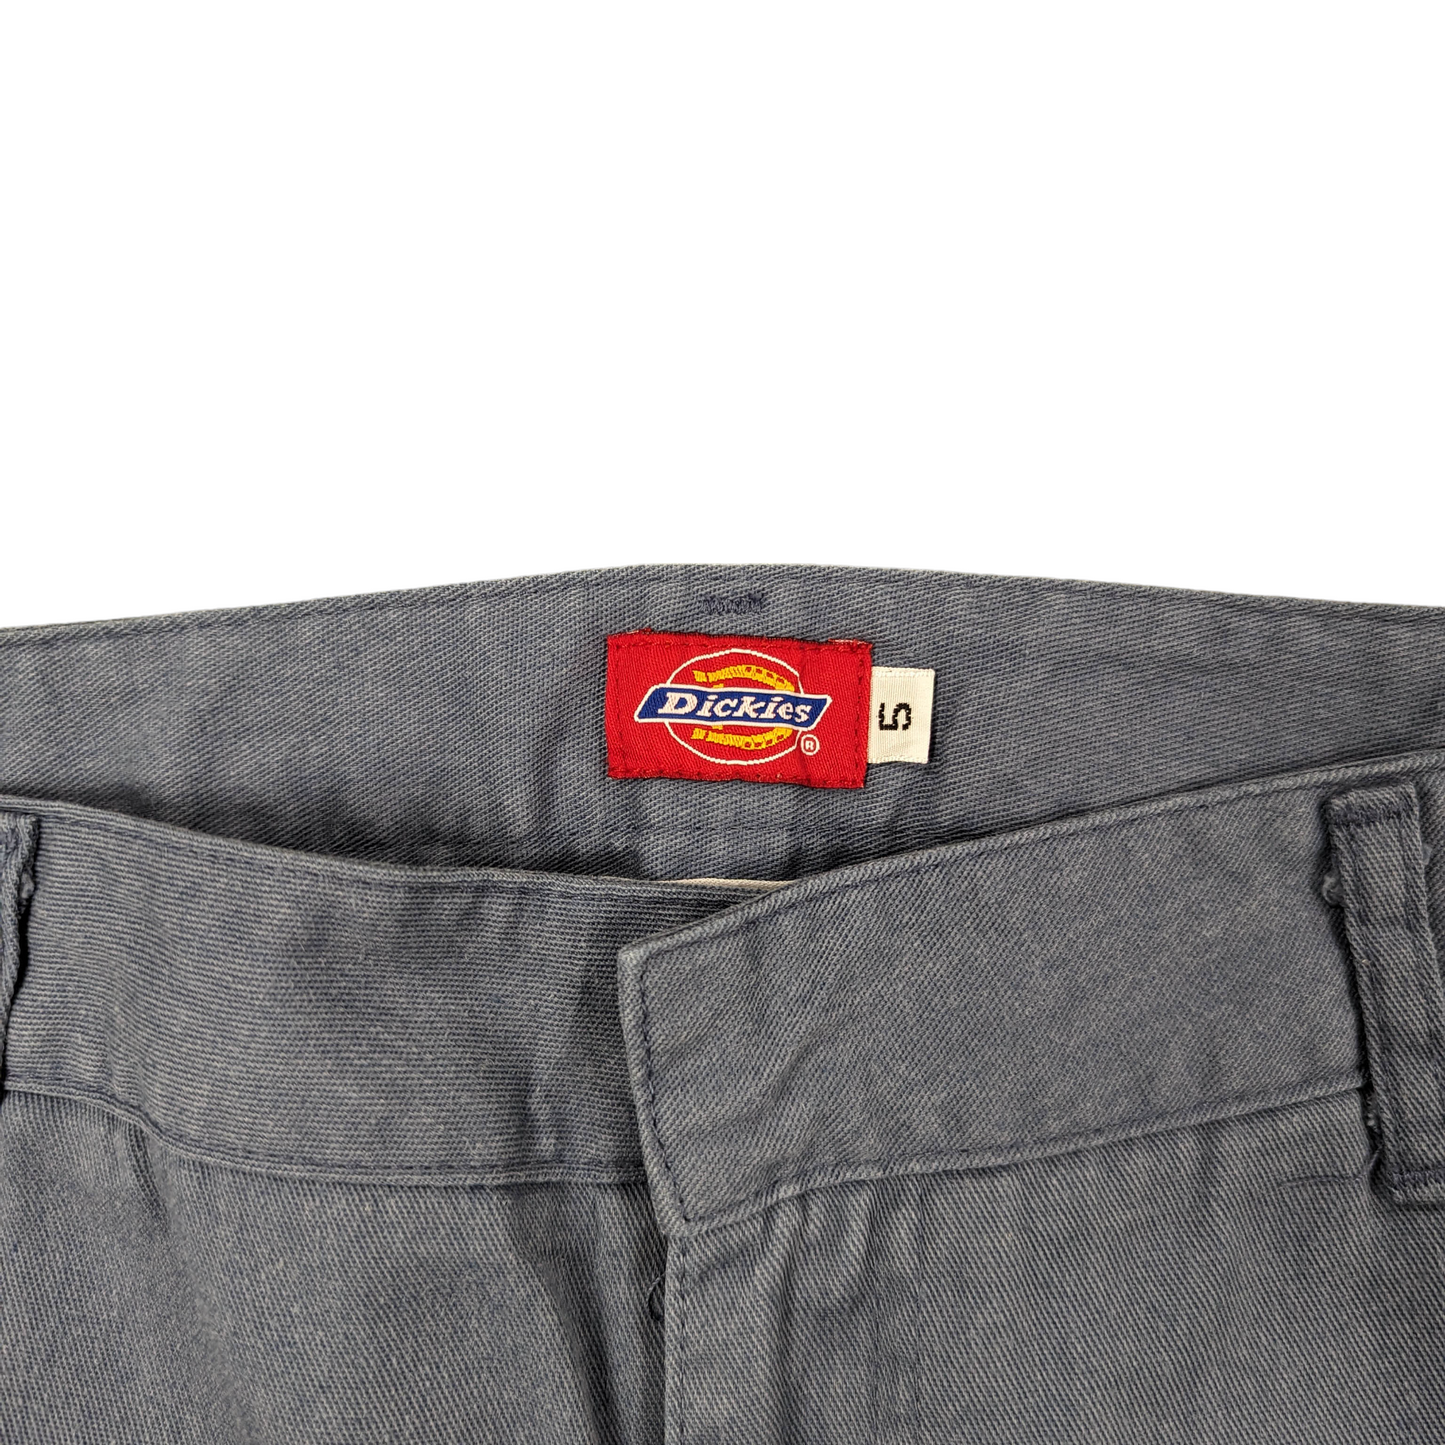 Dickies Low Rise Trousers Size UK12 L32